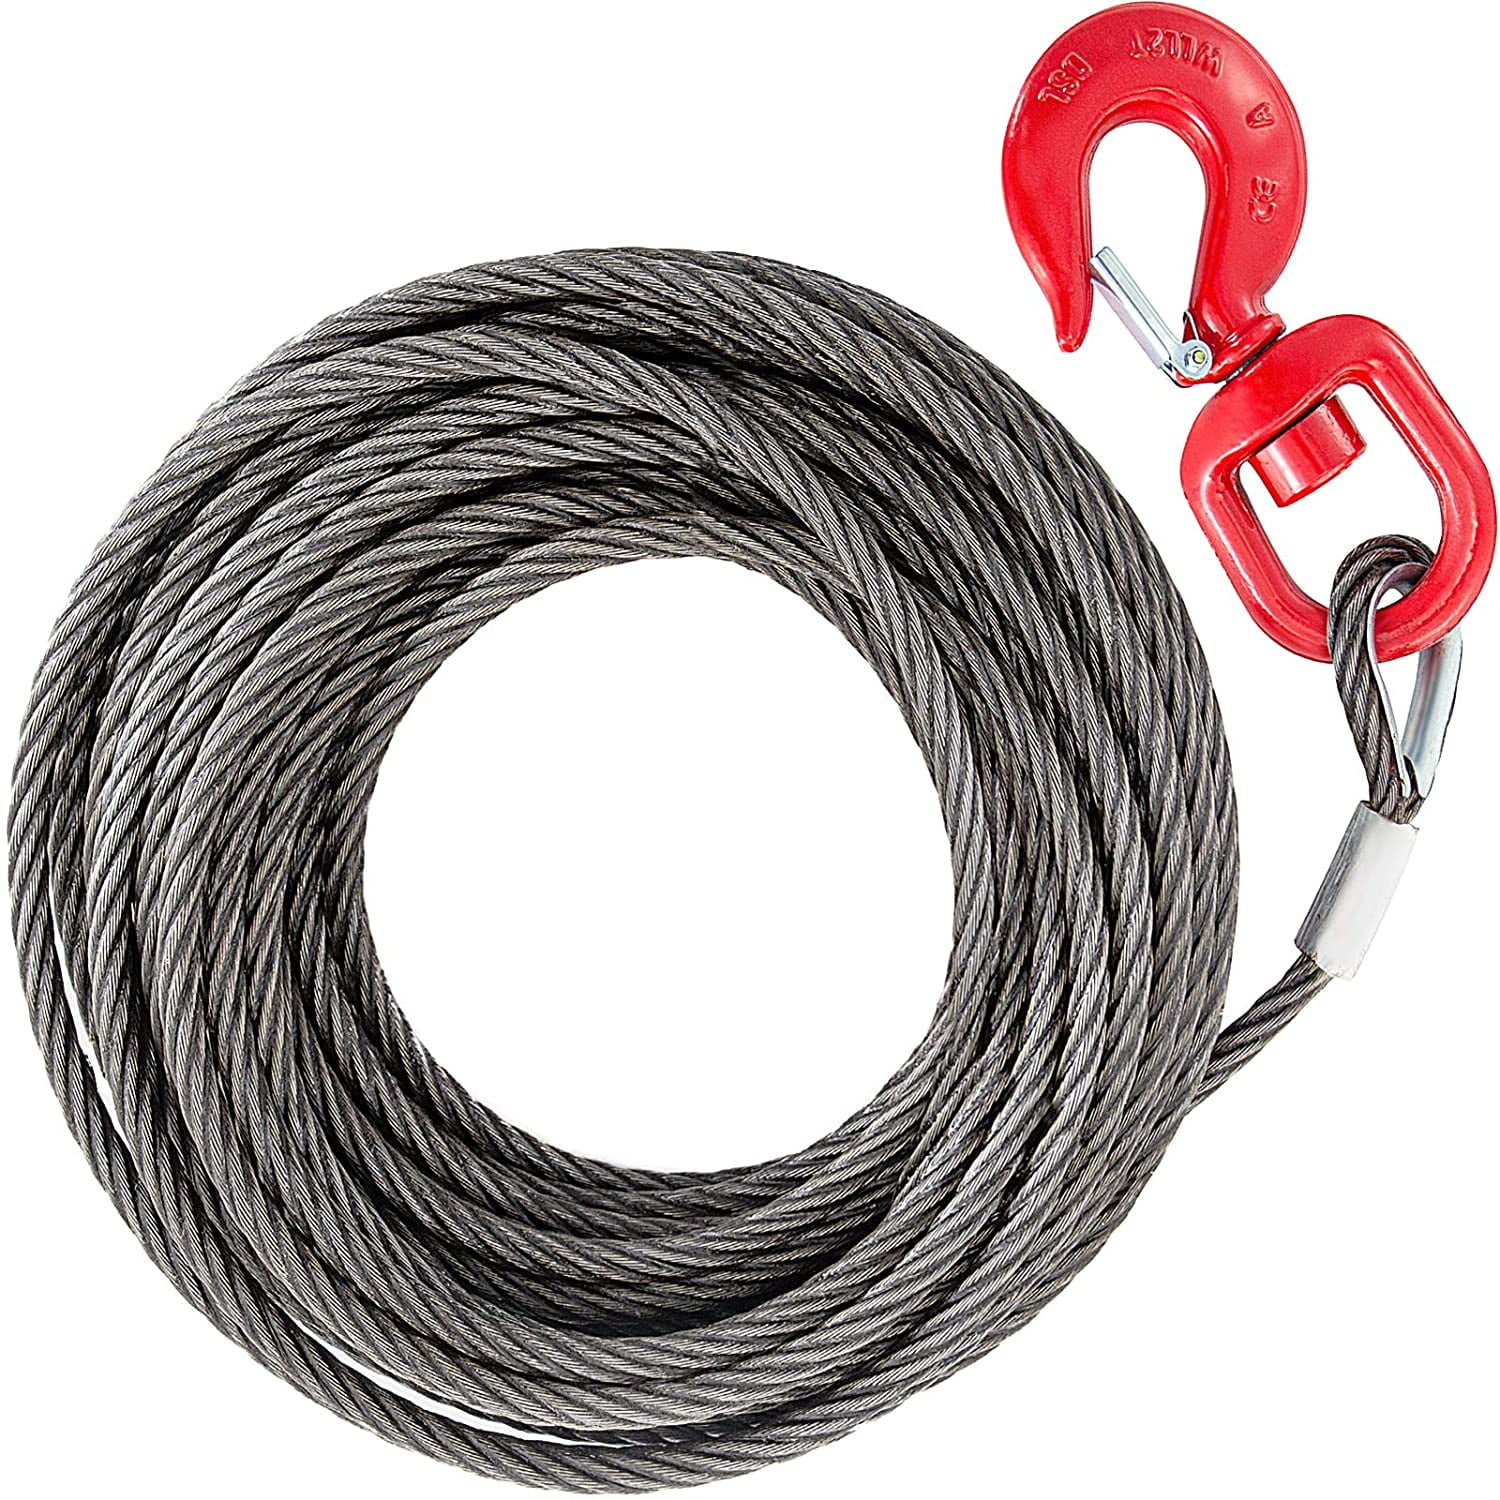 7/16 x 75' IWRC EIPS WINCH CABLE & HOOK Steel Core for Wrecker Tow Truck Crane 